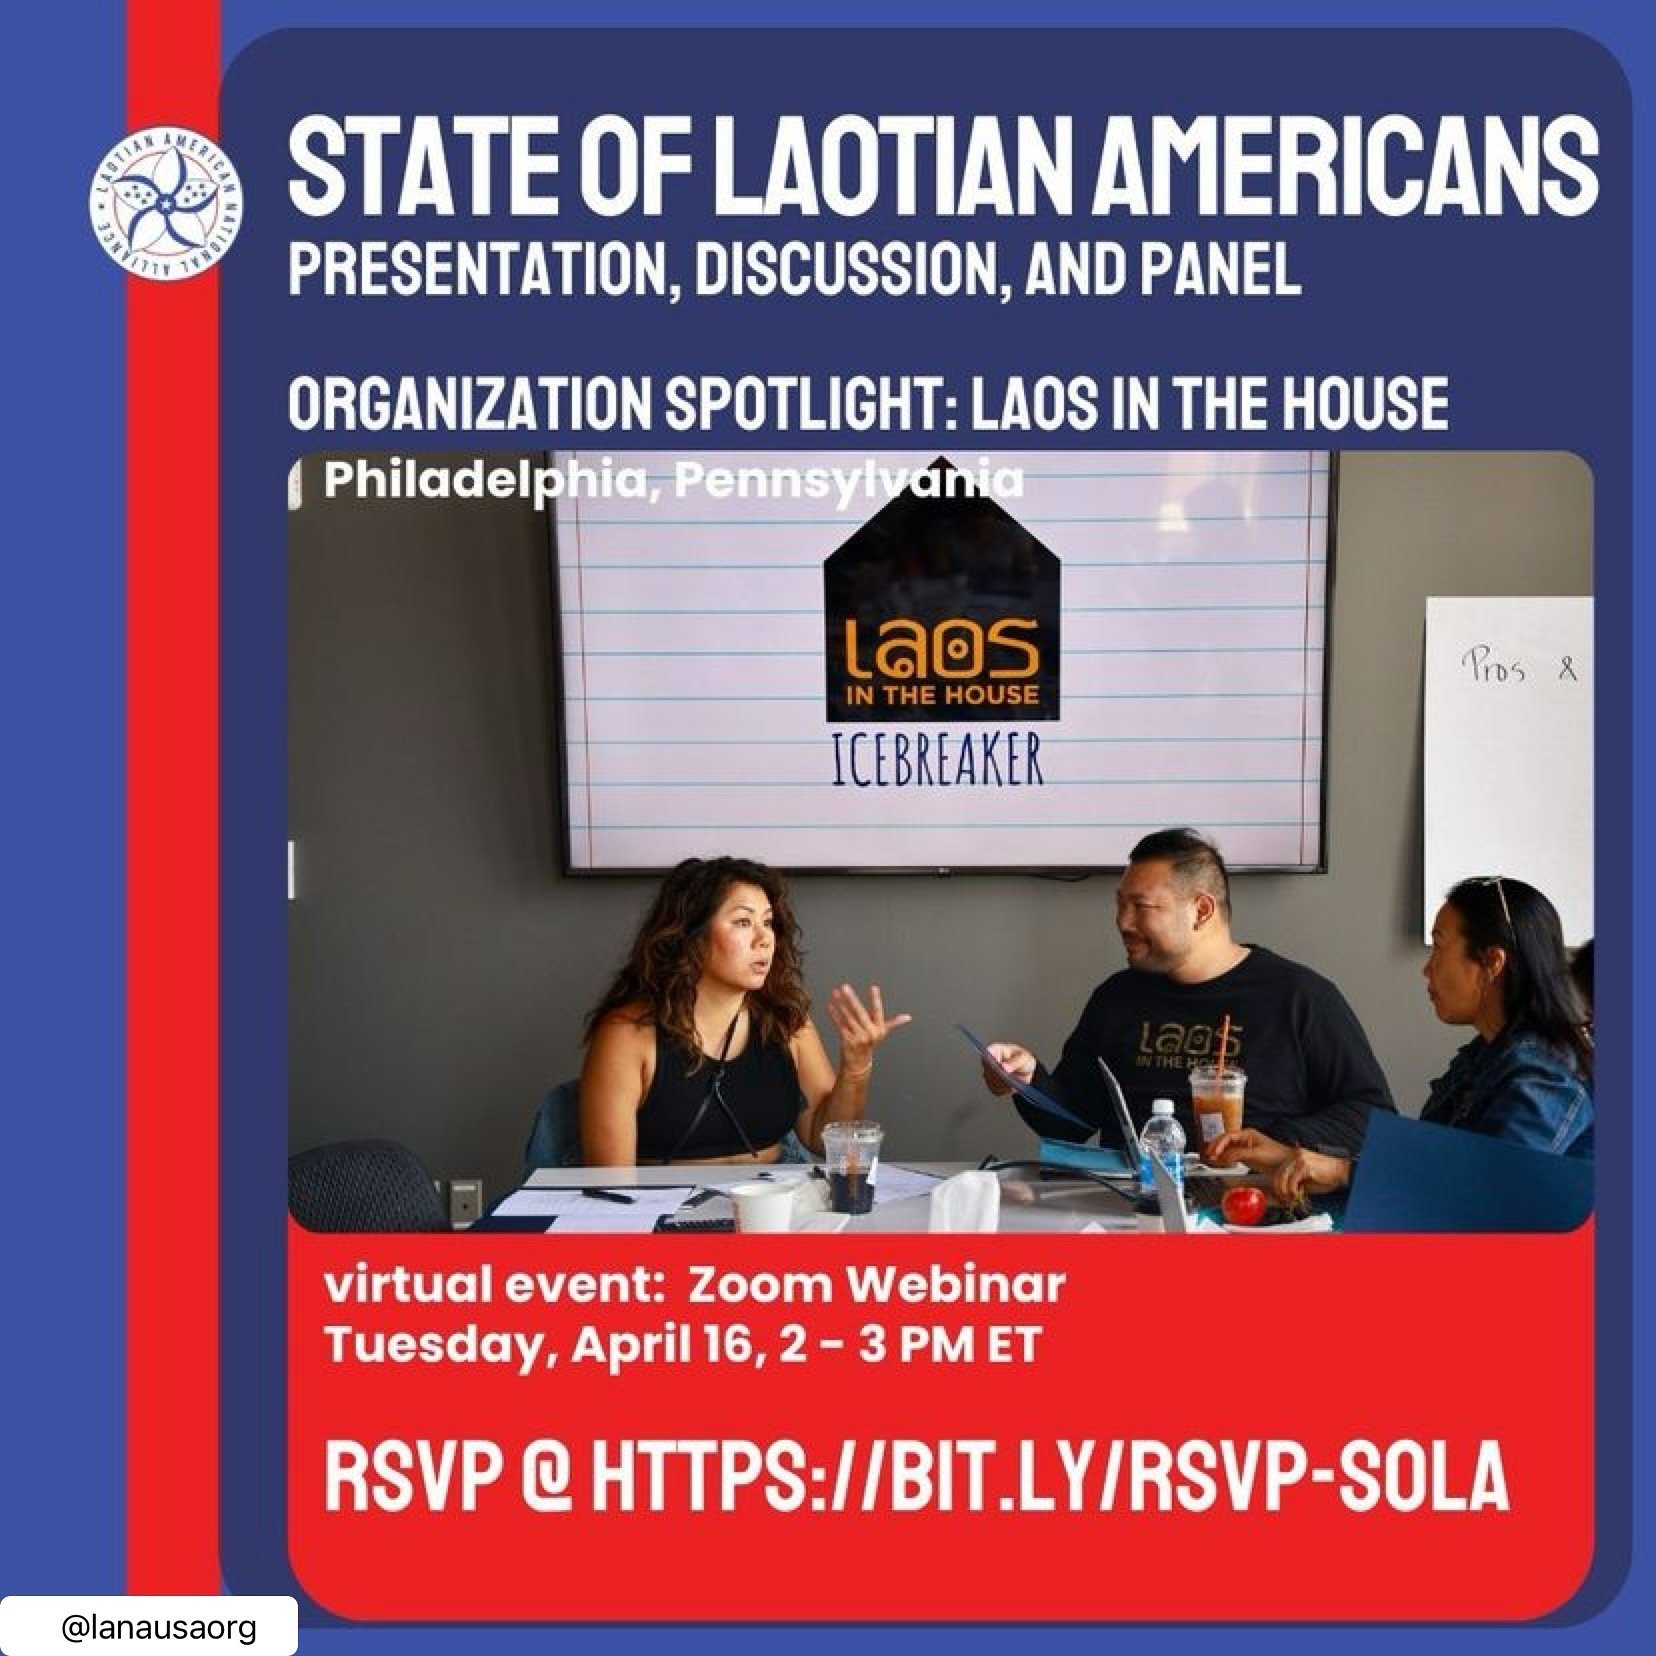 HAPPENING TODAY! State of Laotian Americans (SOLA) virtual event hosted by the Laotian American National Alliance (LANA).
Join us today and hear Catzie speaking as a panelist and representing Laos In The House about her experience participating in a 